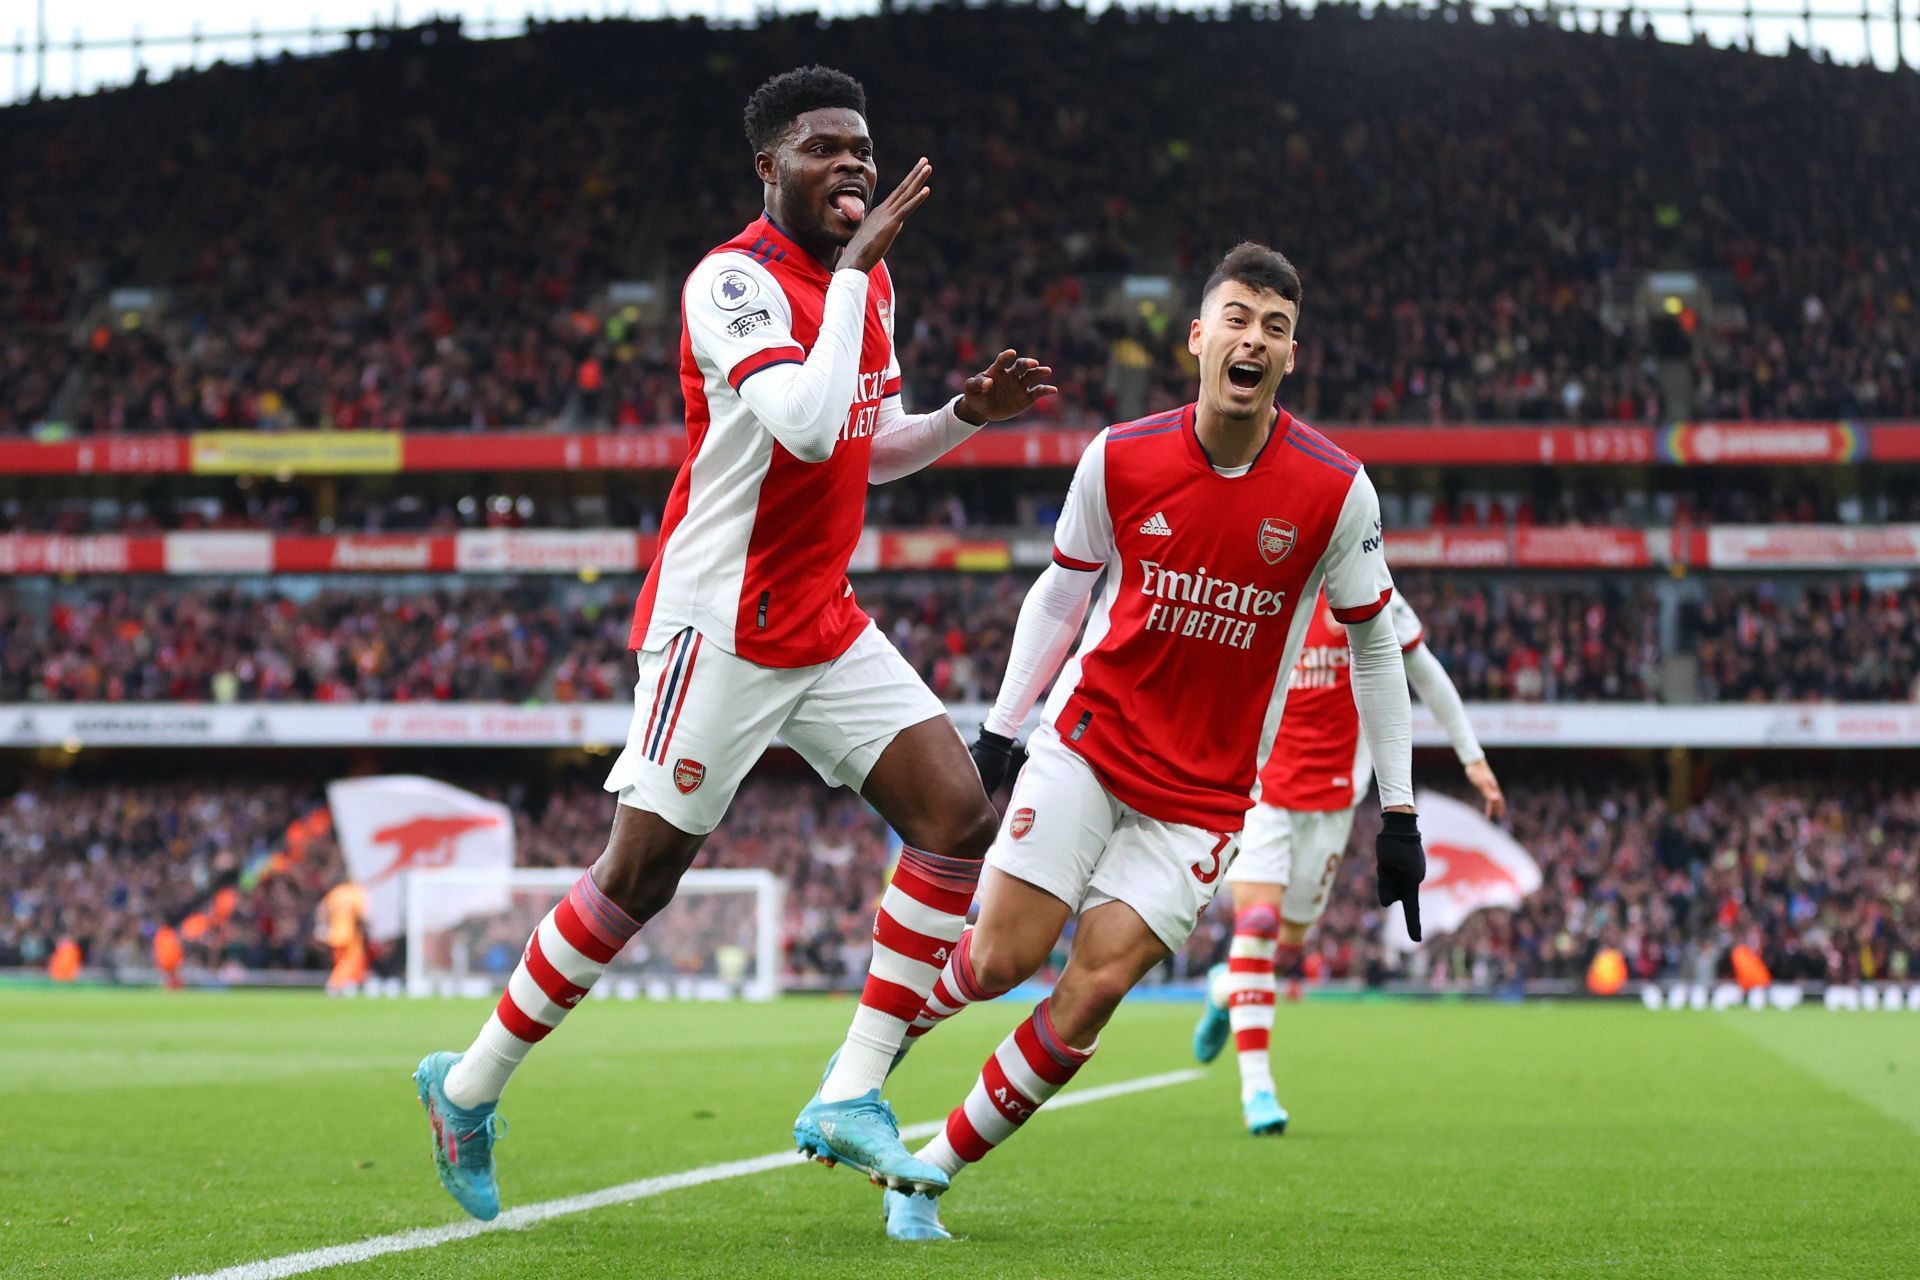 The Gunners recorded their fifth straight Premier League win after beating Leicester City.